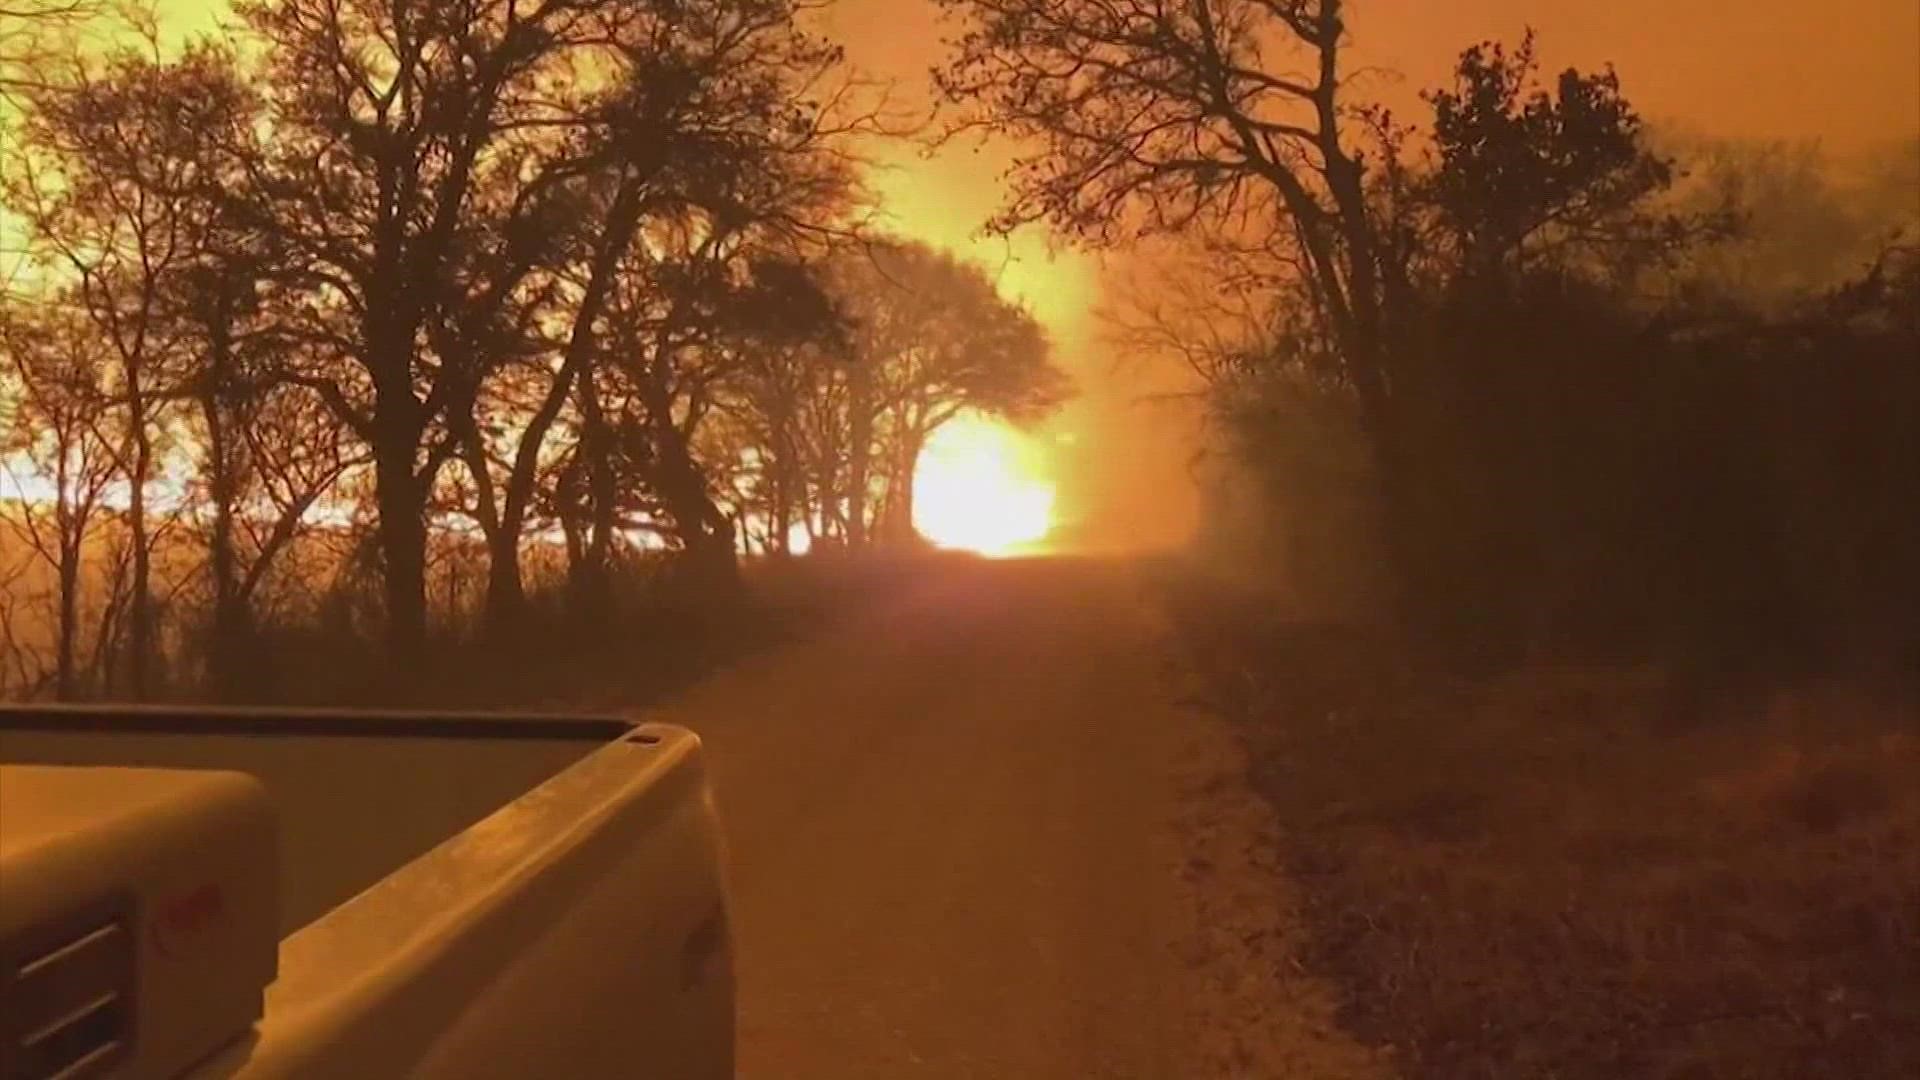 Climate change has made the Texas heat hotter and longer-lasting, enhancing drought conditions that set the stage for intense fires.